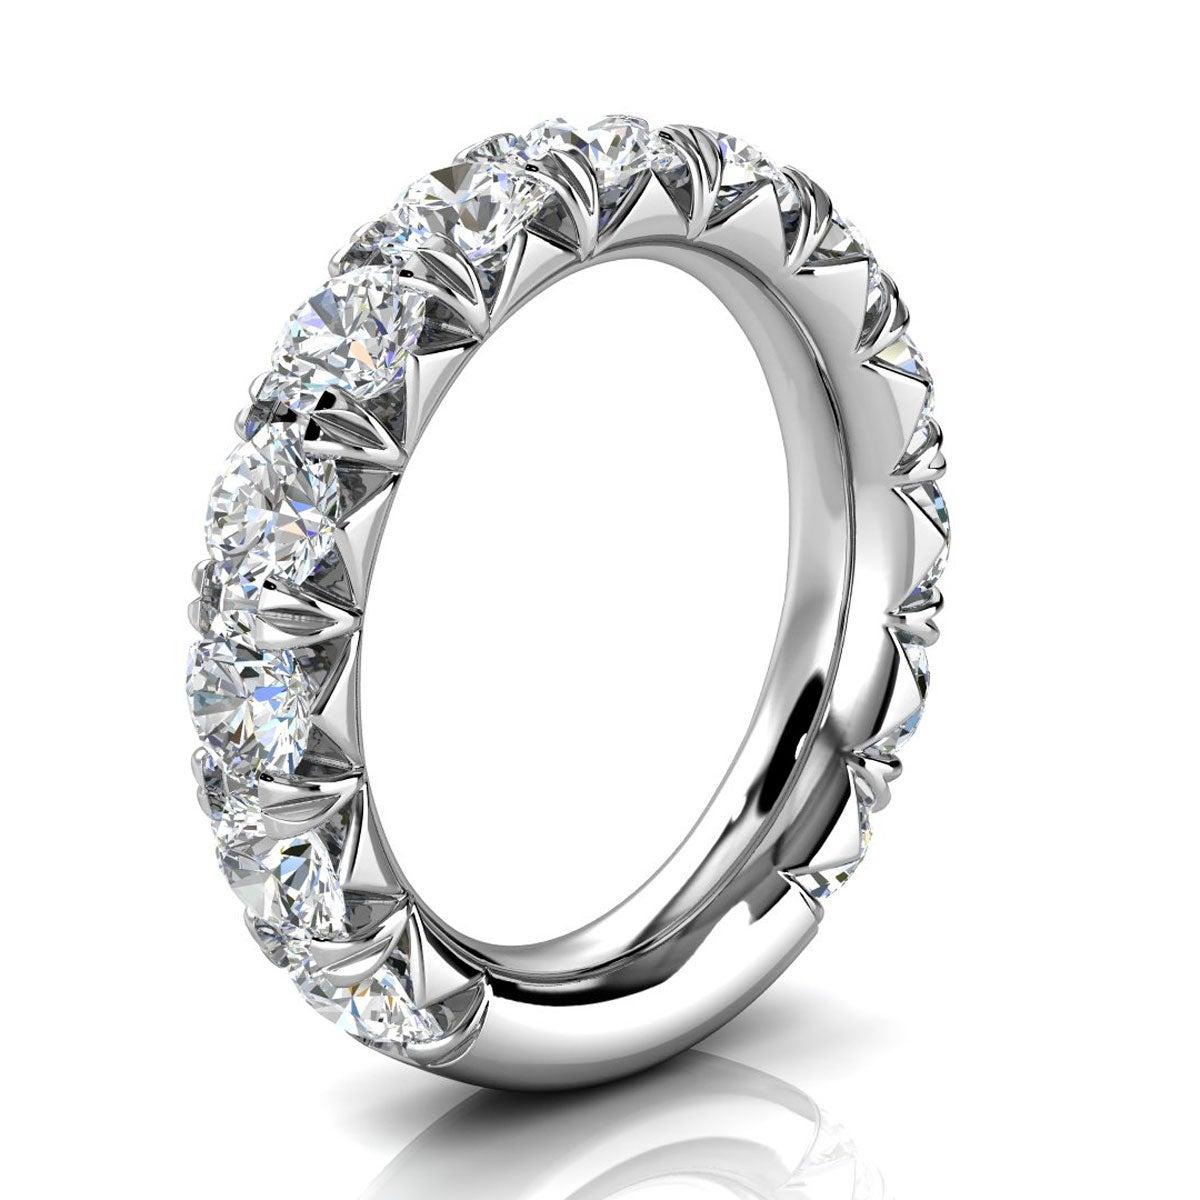 For Sale:  14k White Gold GIA French Pave Diamond Ring '3 Ct. tw' 2